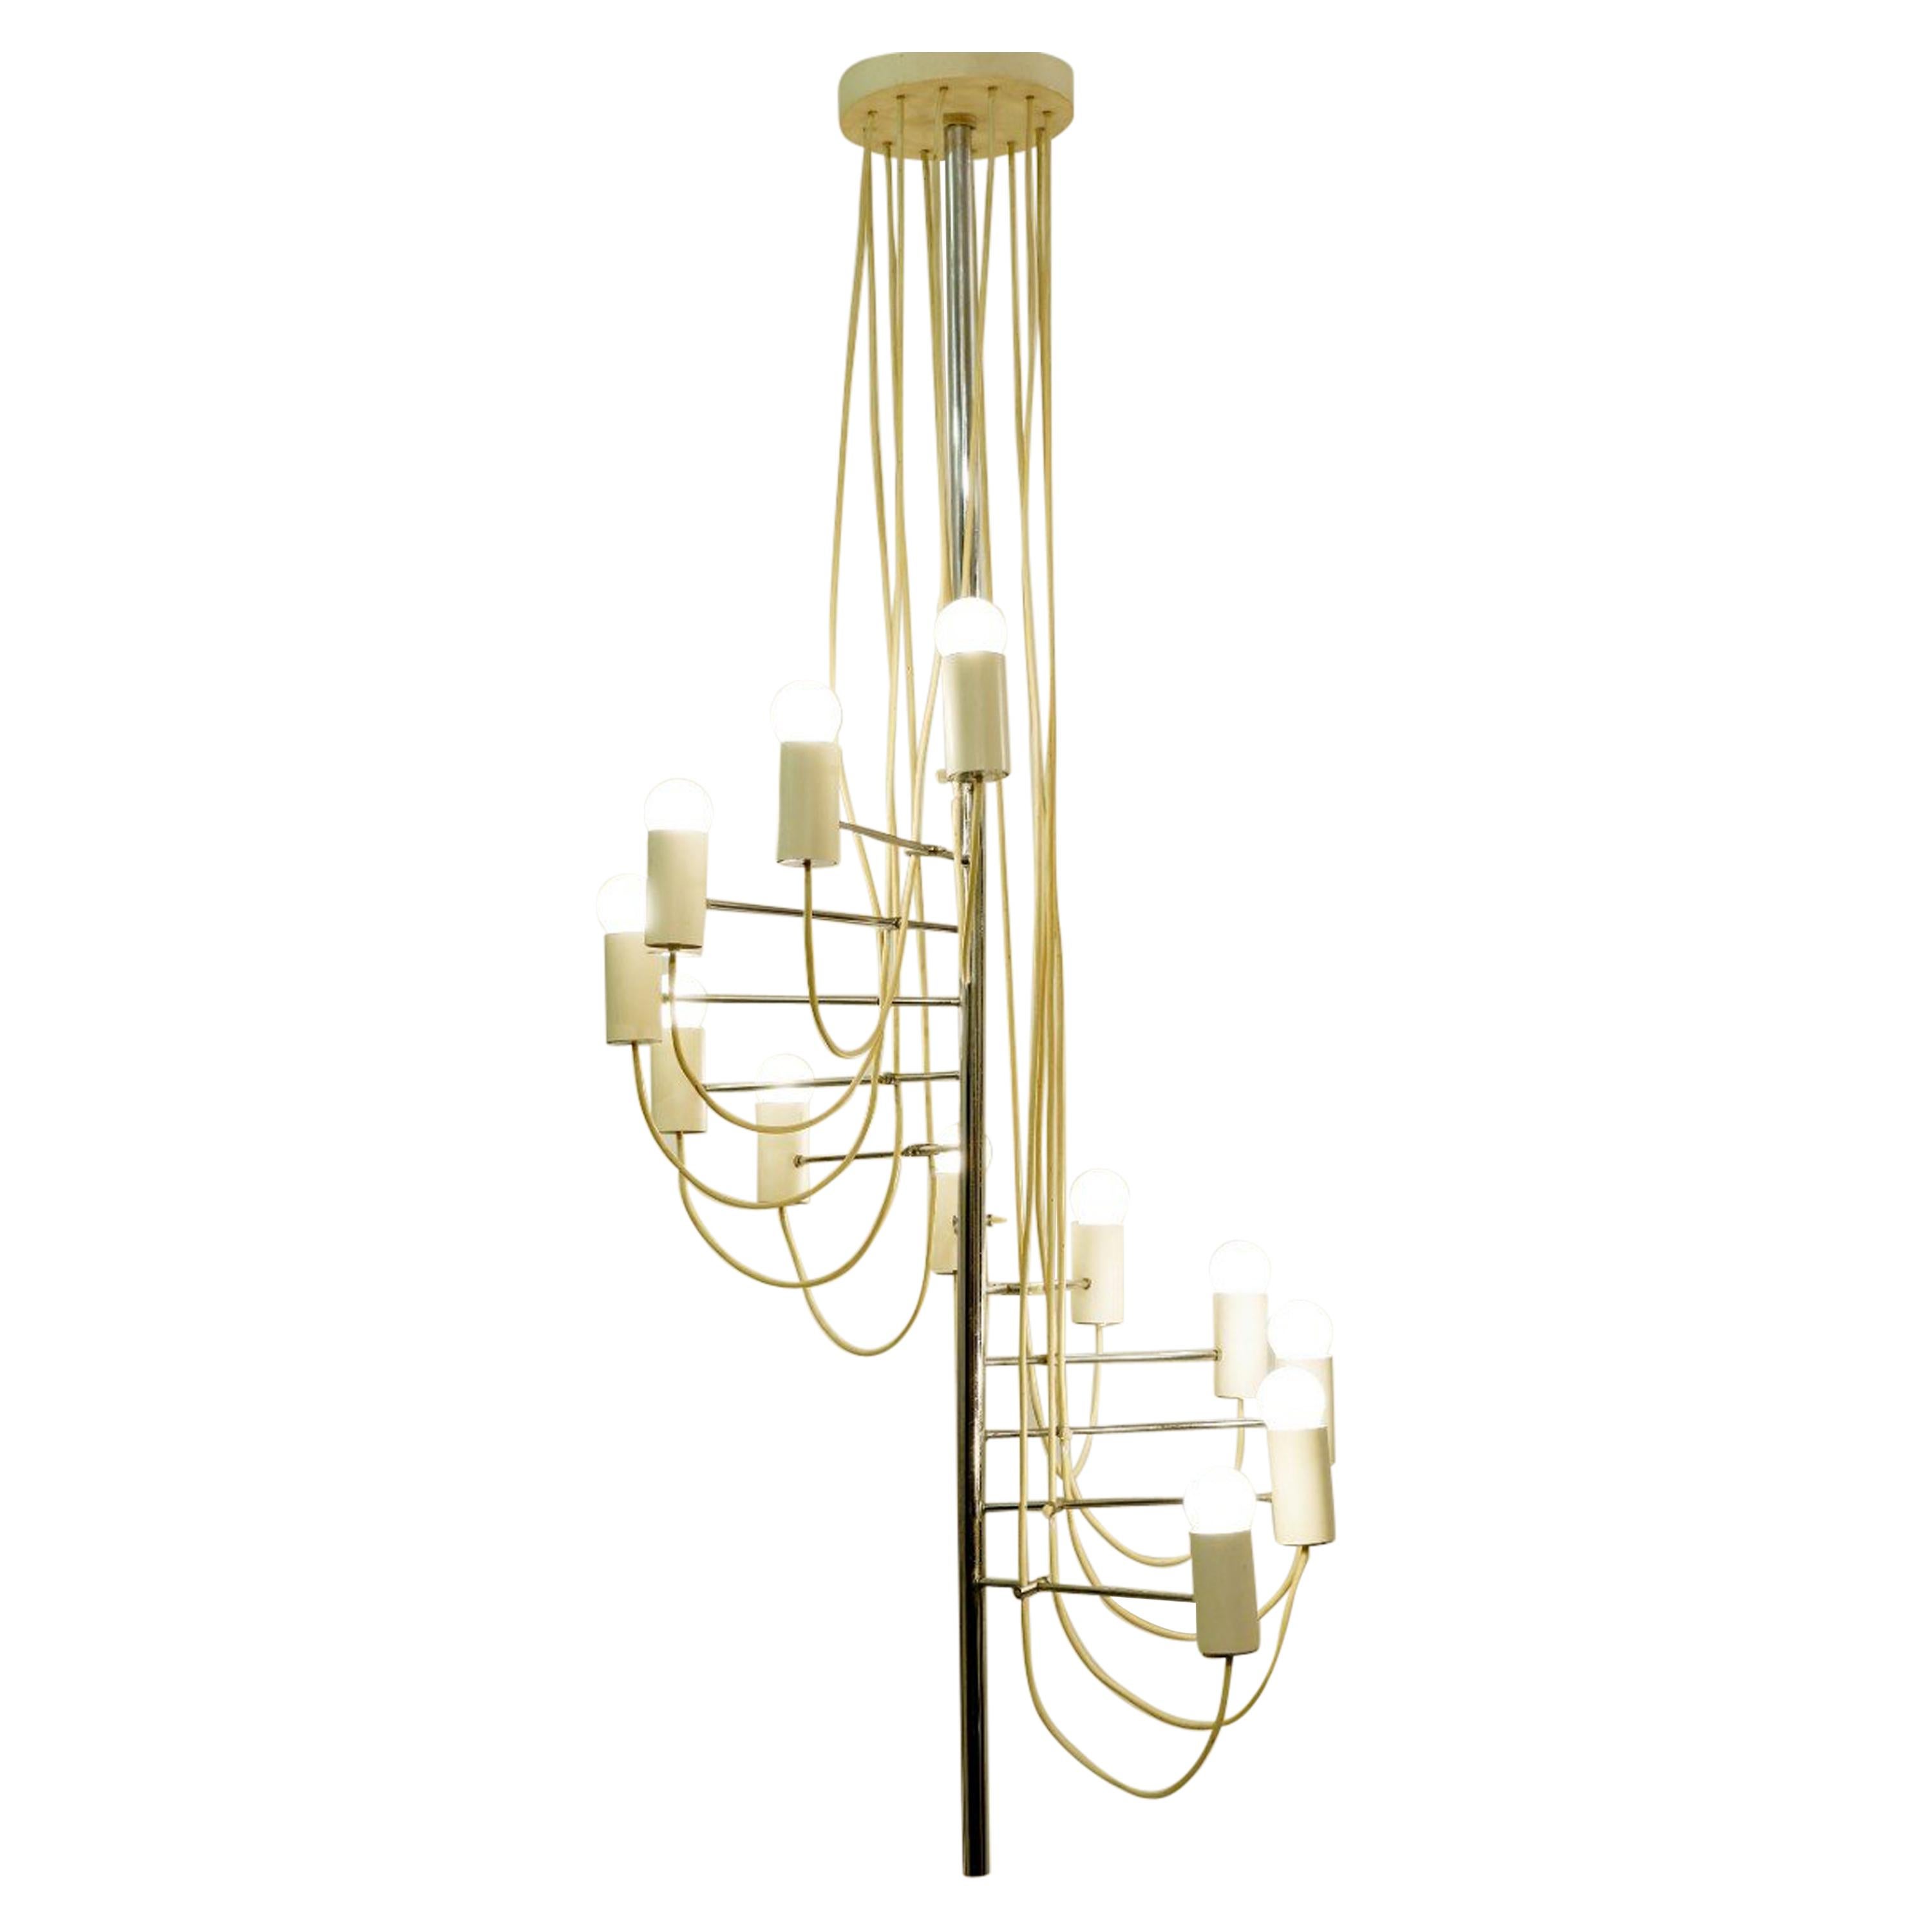 French Midcentury Minimalist 'A16' Chandelier by Alain Richard for Disderot